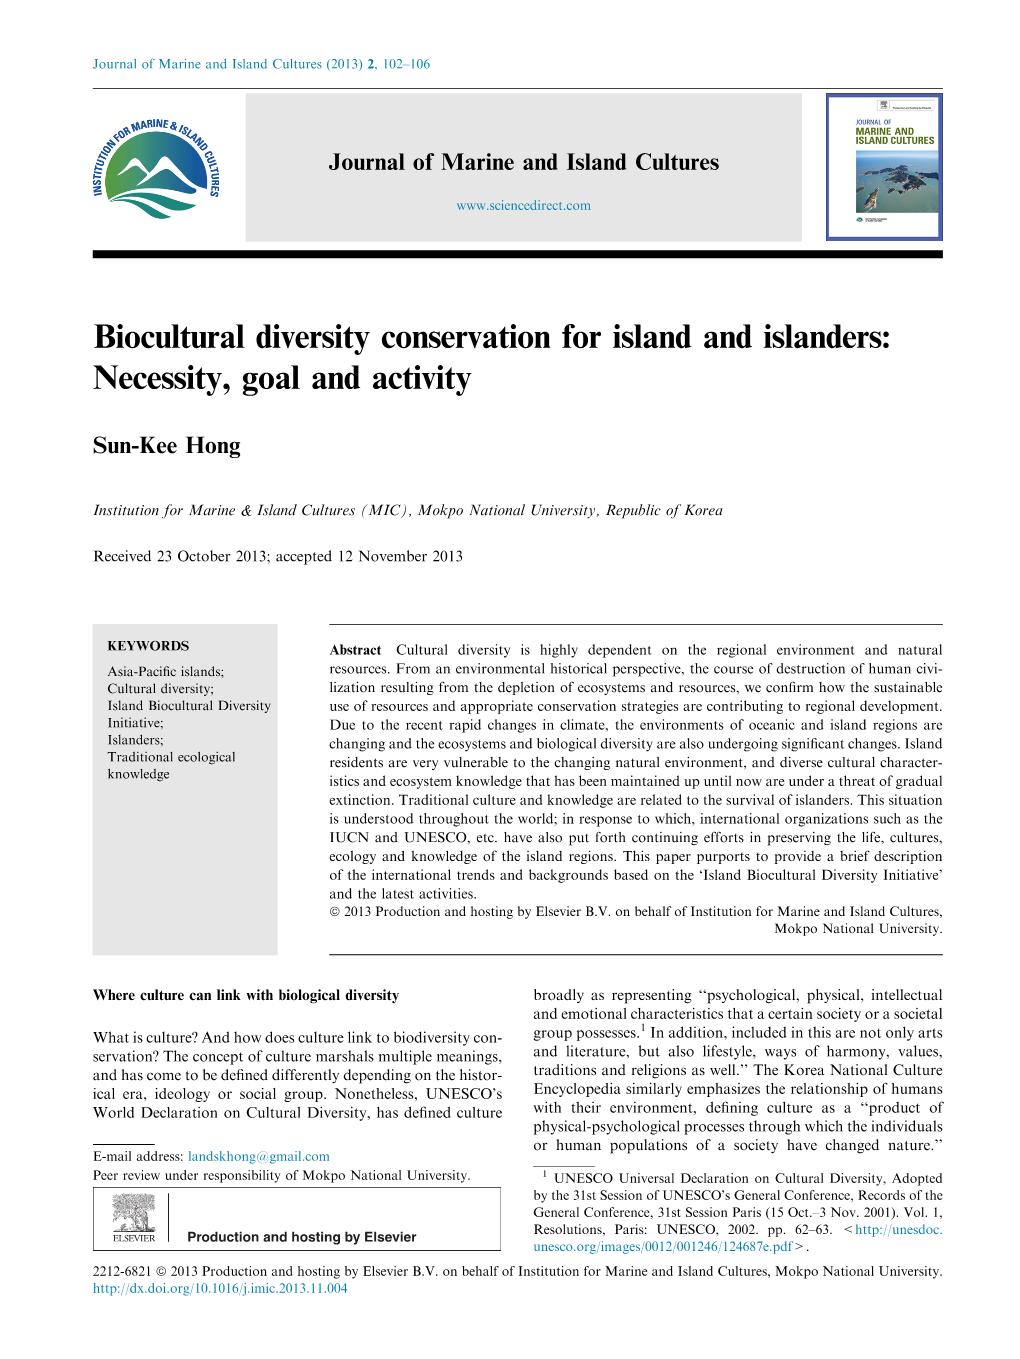 Biocultural Diversity Conservation for Island and Islanders: Necessity, Goal and Activity